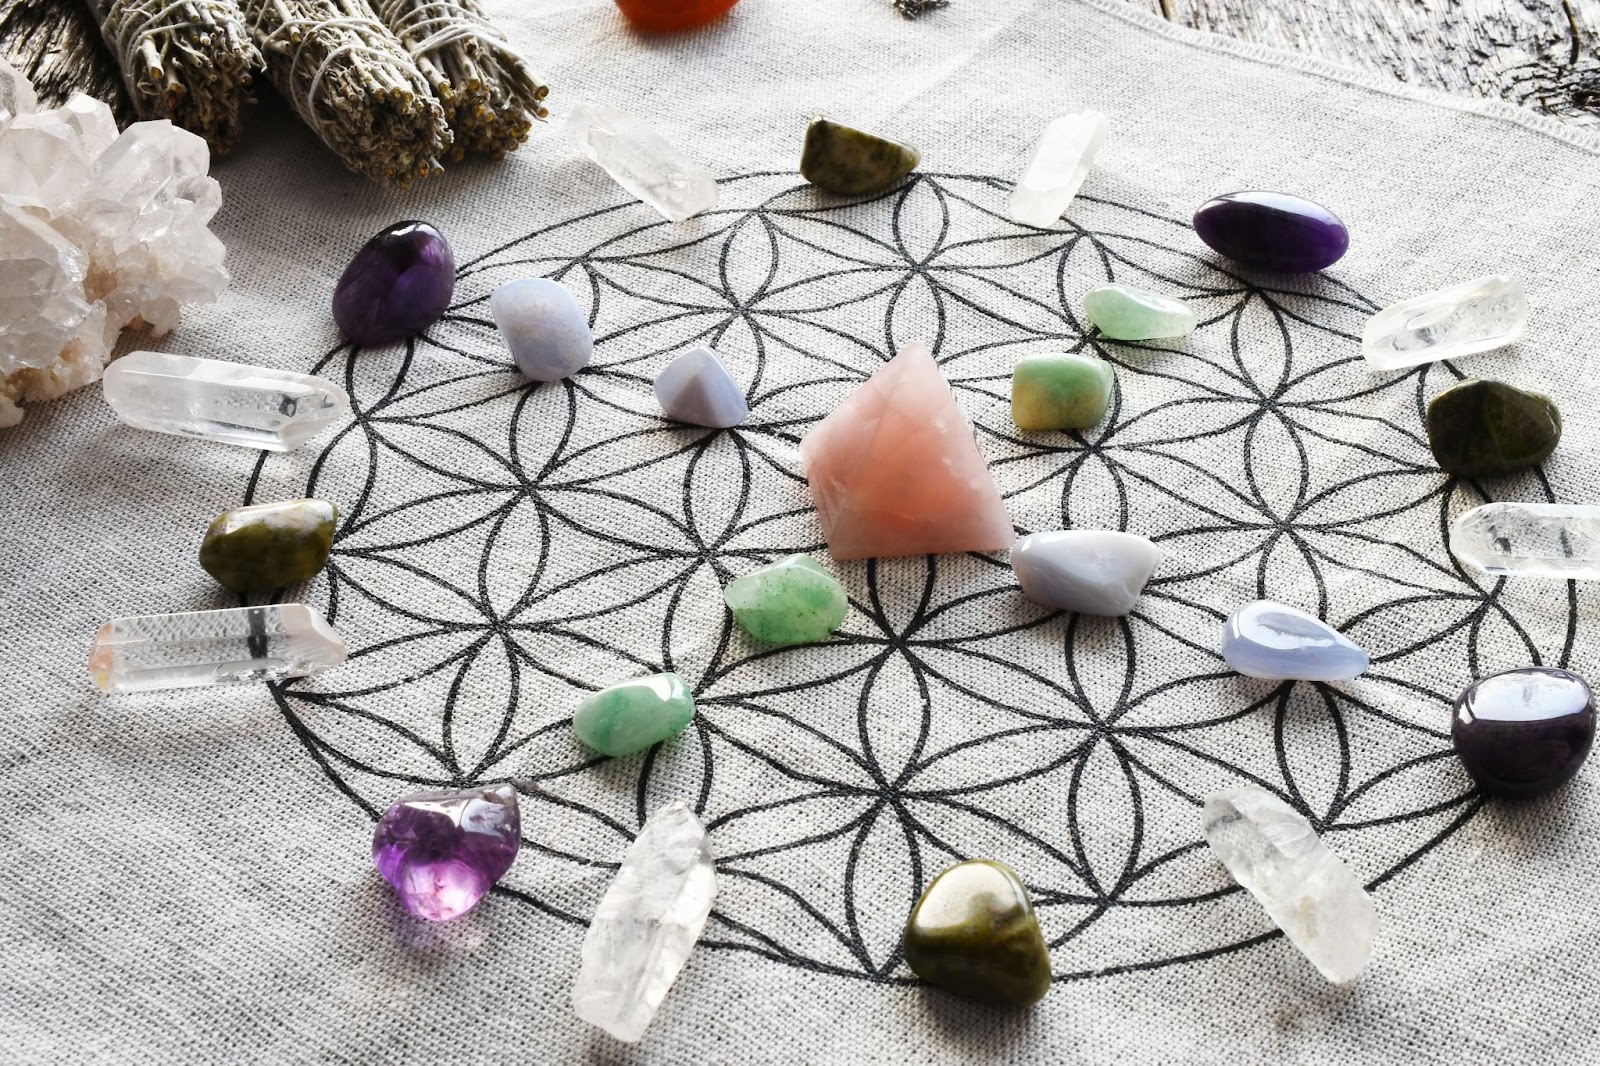 A crystal grid including a variety of crystals laid out in a circular format.